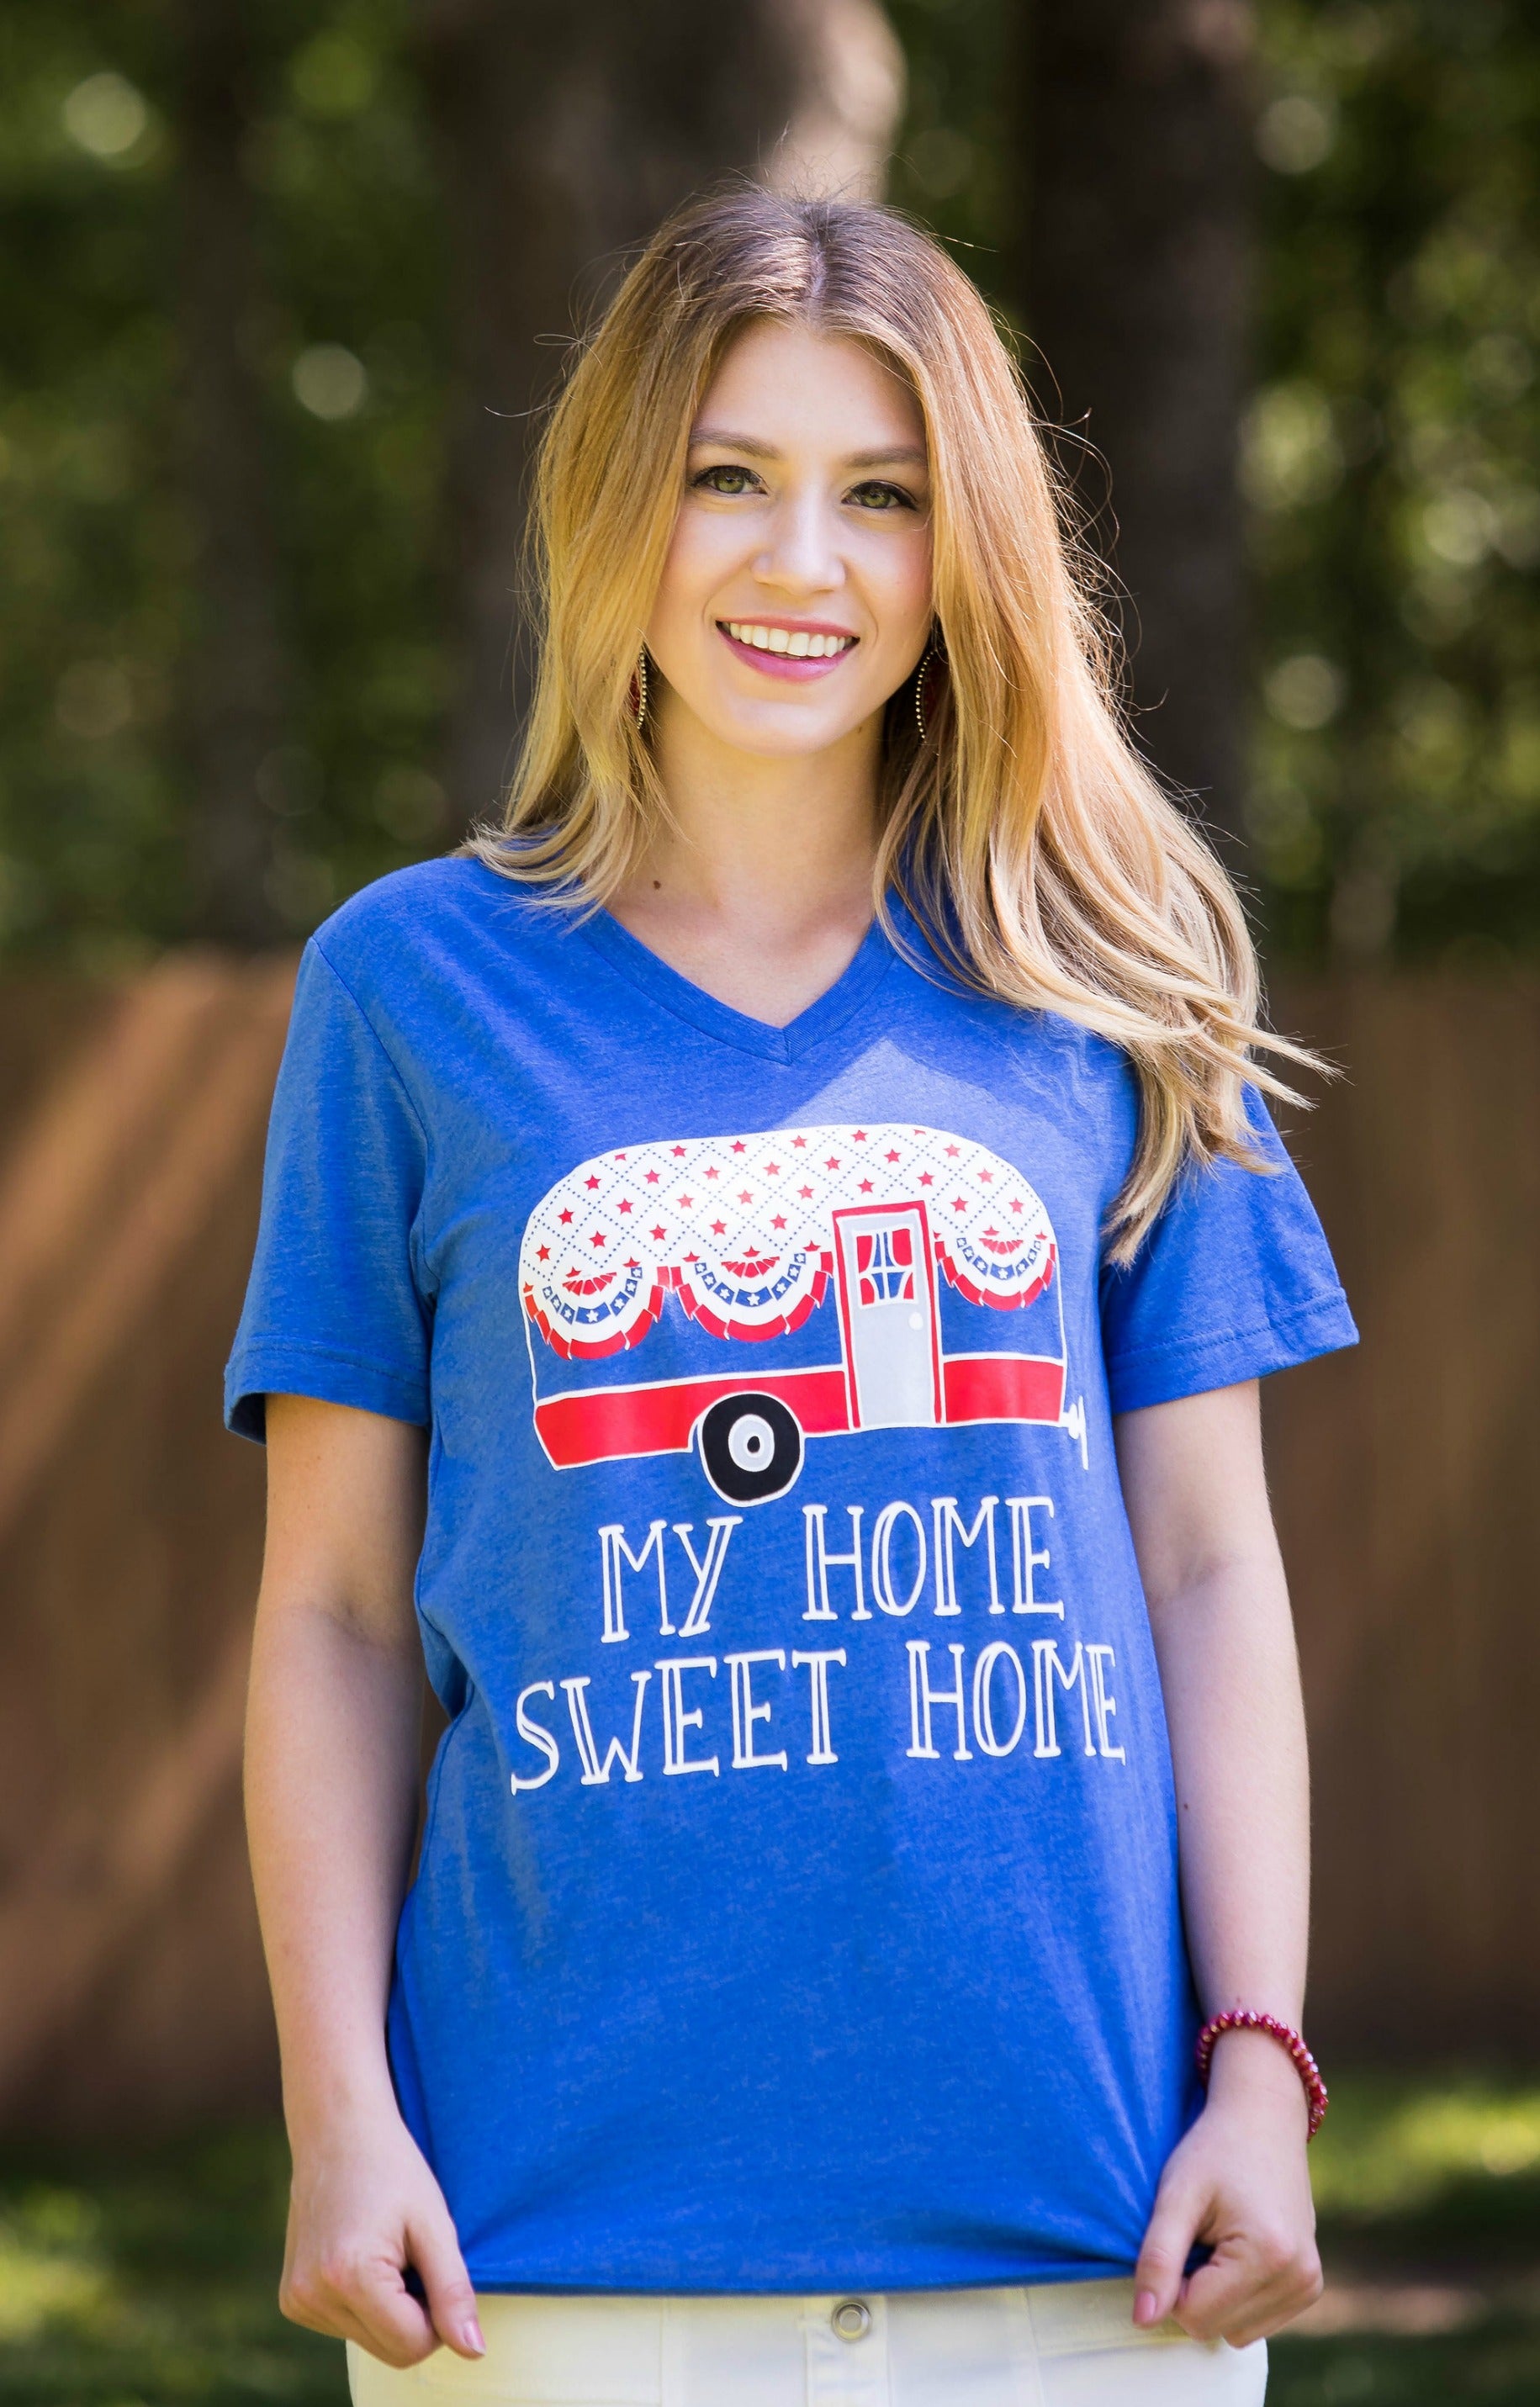 Last Chance Size Small | My Home Sweet Home Short Sleeve Tee Shirt in Blue - Giddy Up Glamour Boutique